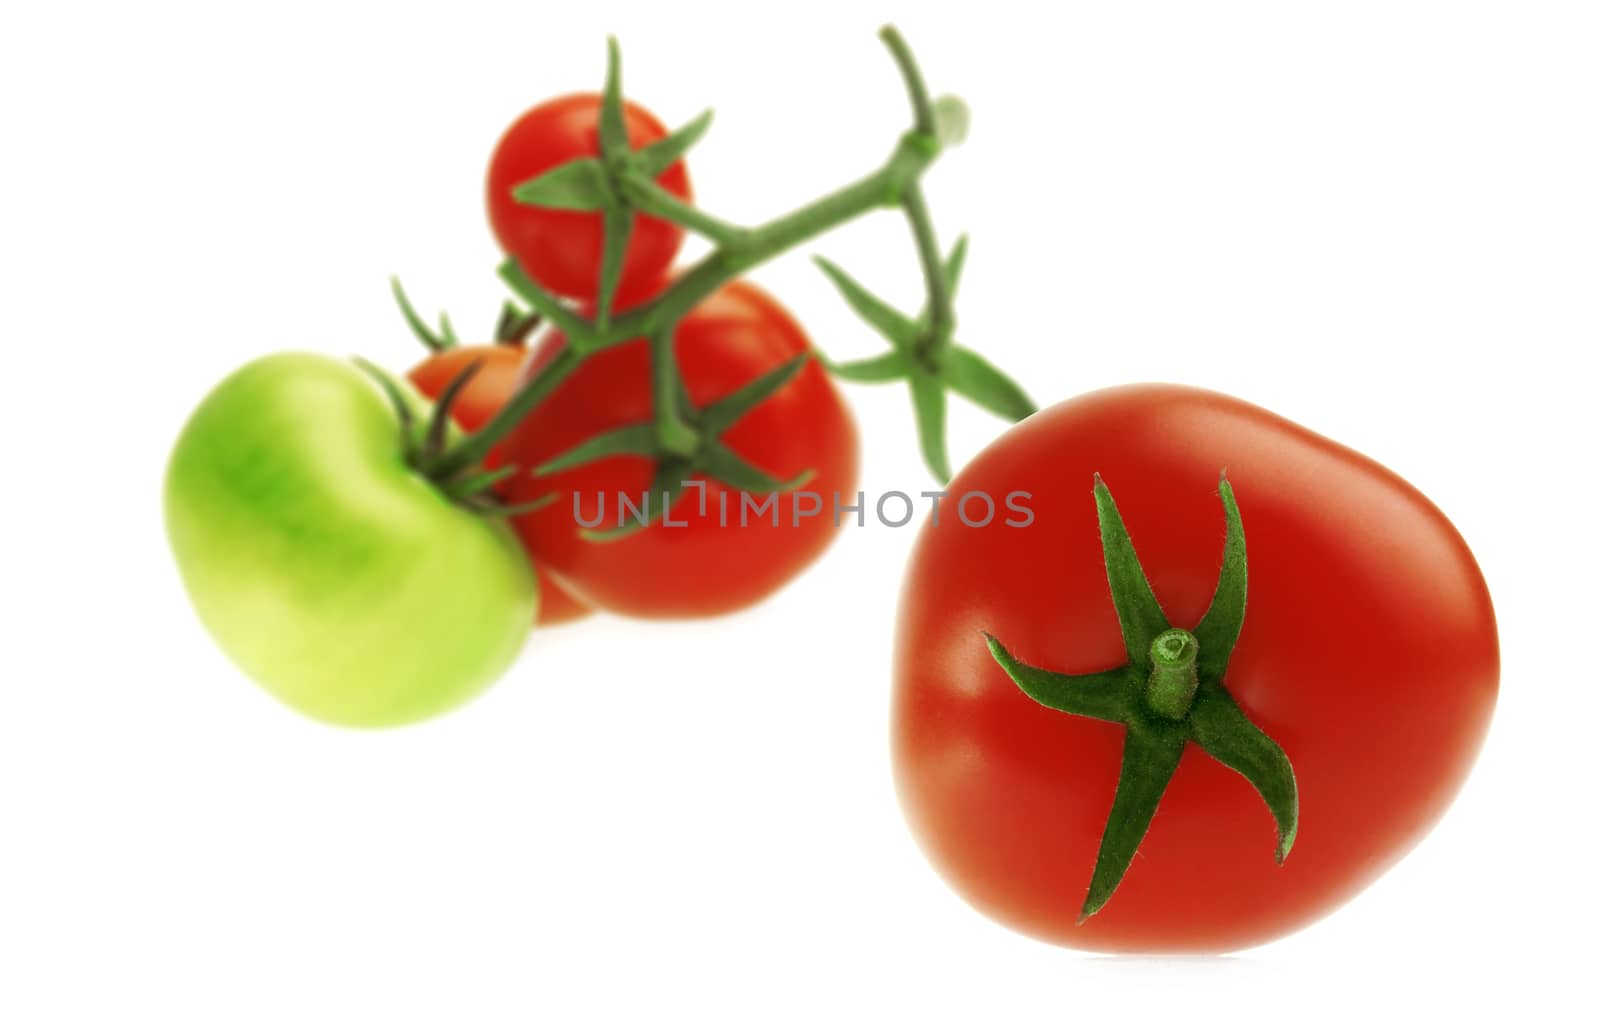 Bunch of fresh red and green Tomatoes. by red2000